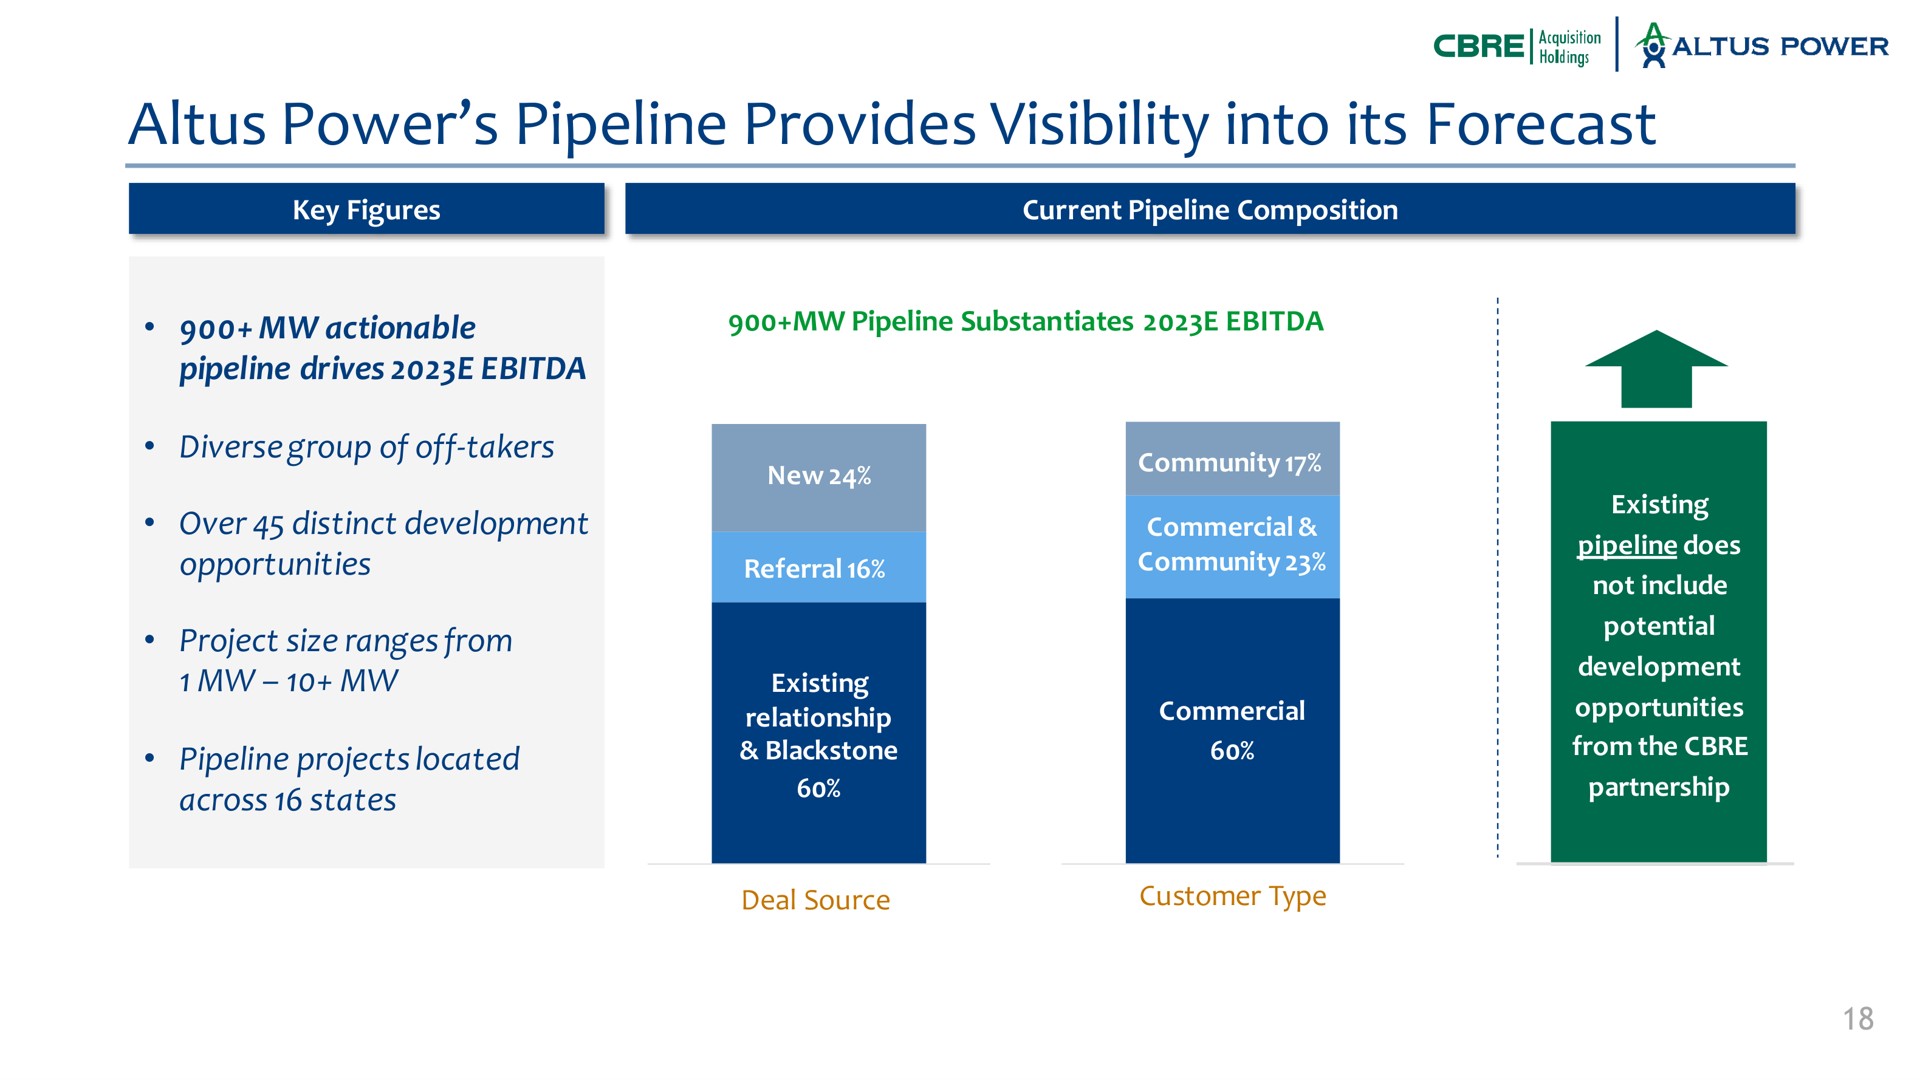 power pipeline provides visibility into its forecast gage actionable drives diverse group of off takers over distinct development opportunities project size ranges from projects located across states current composition substantiates partnership a not include at from the be existing deal source customer type | Altus Power